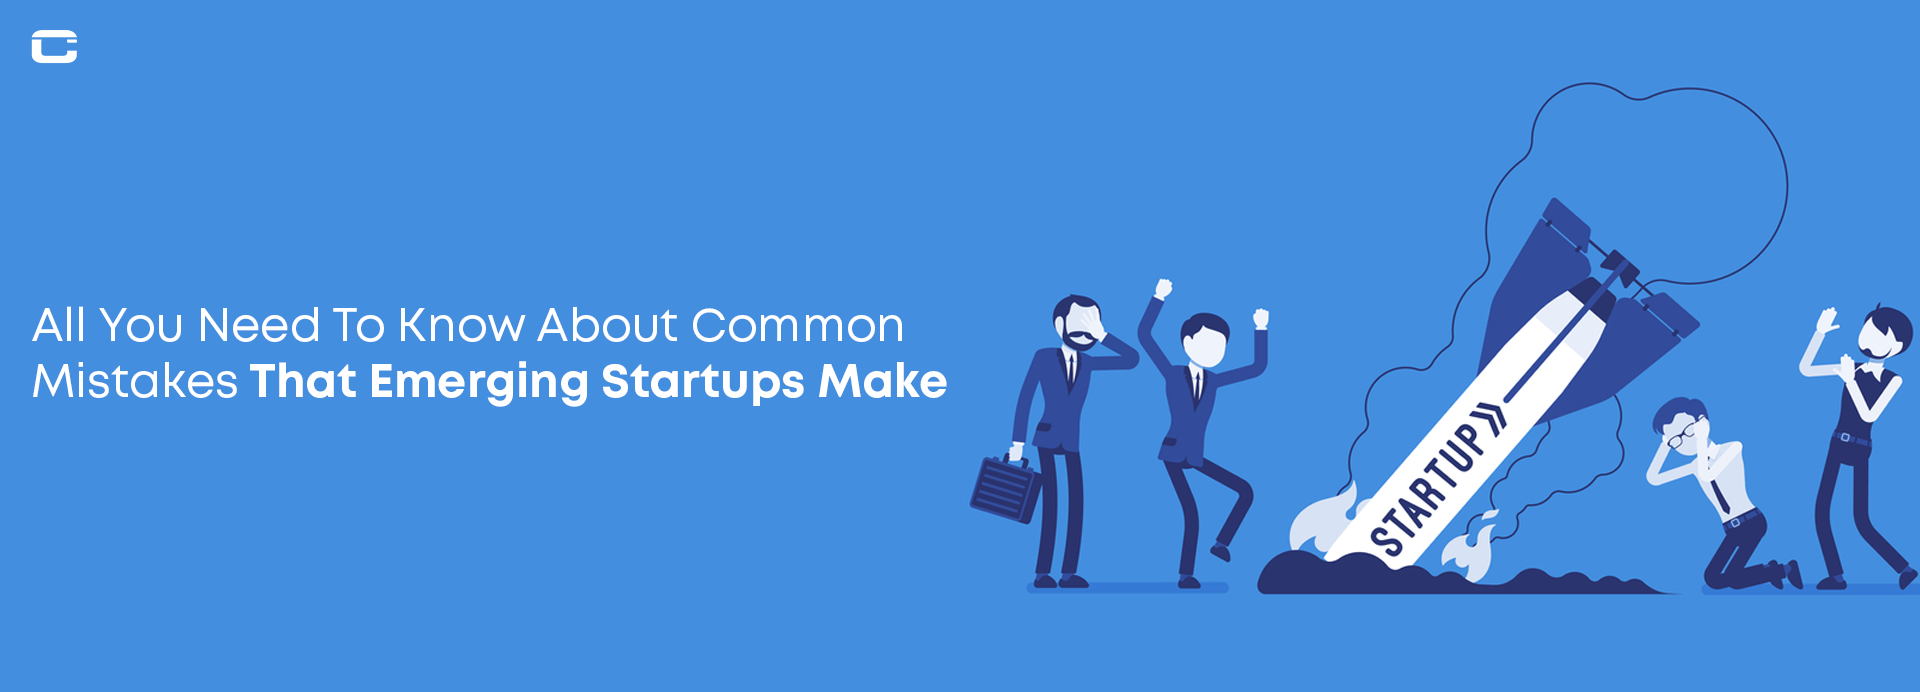 All You Need To Know About Common Mistakes That Emerging Startups Make